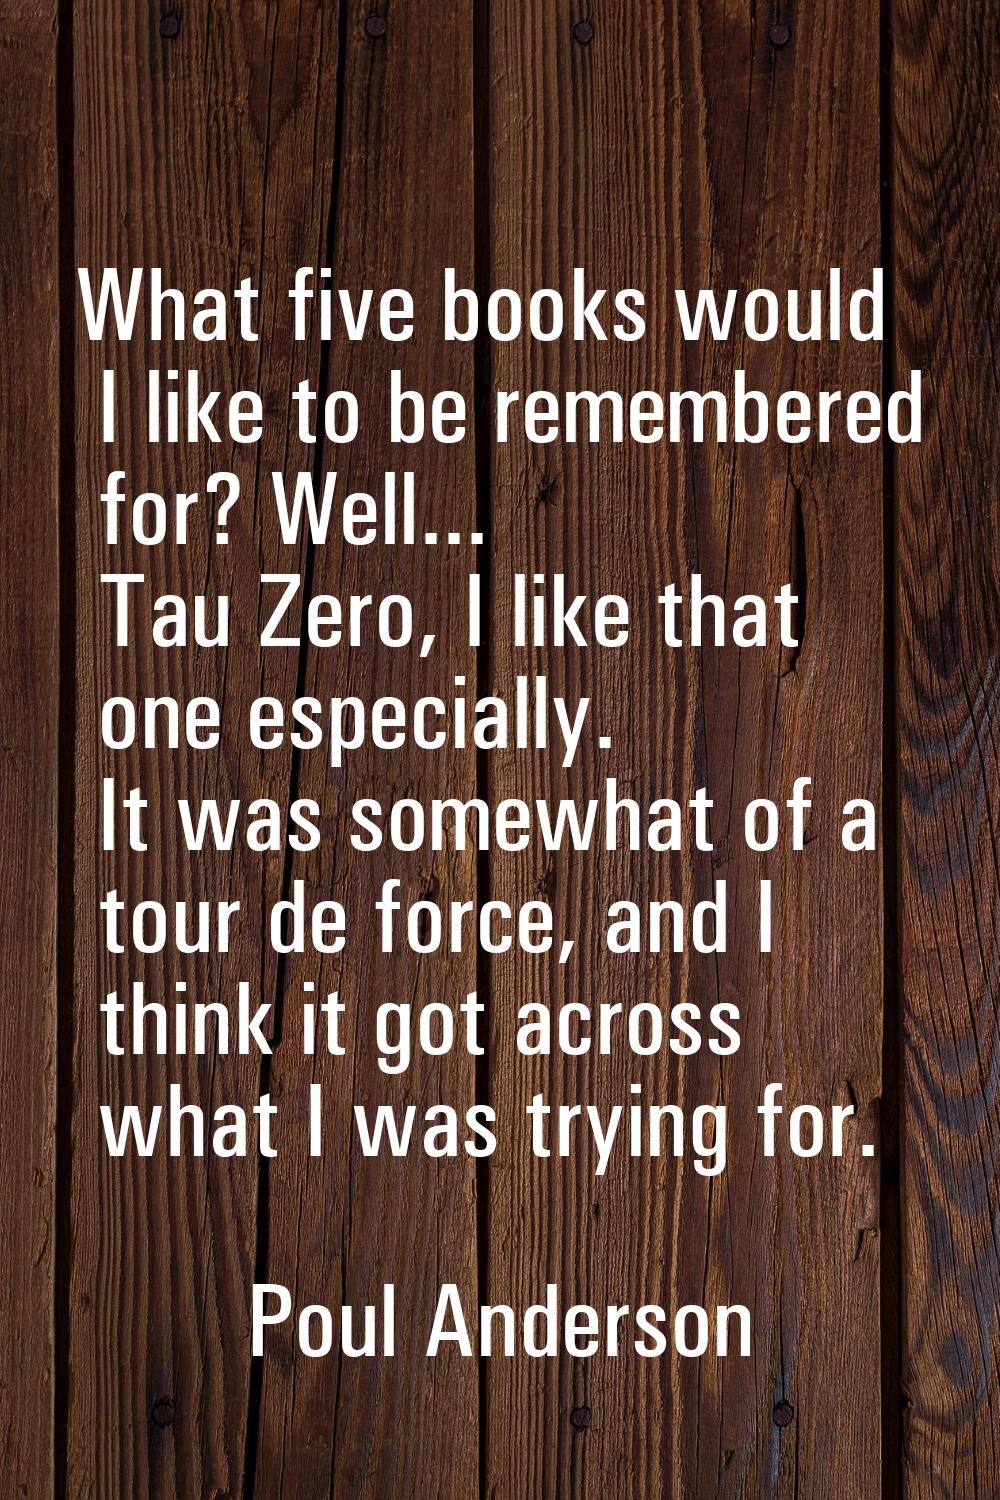 What five books would I like to be remembered for? Well... Tau Zero, I like that one especially. It